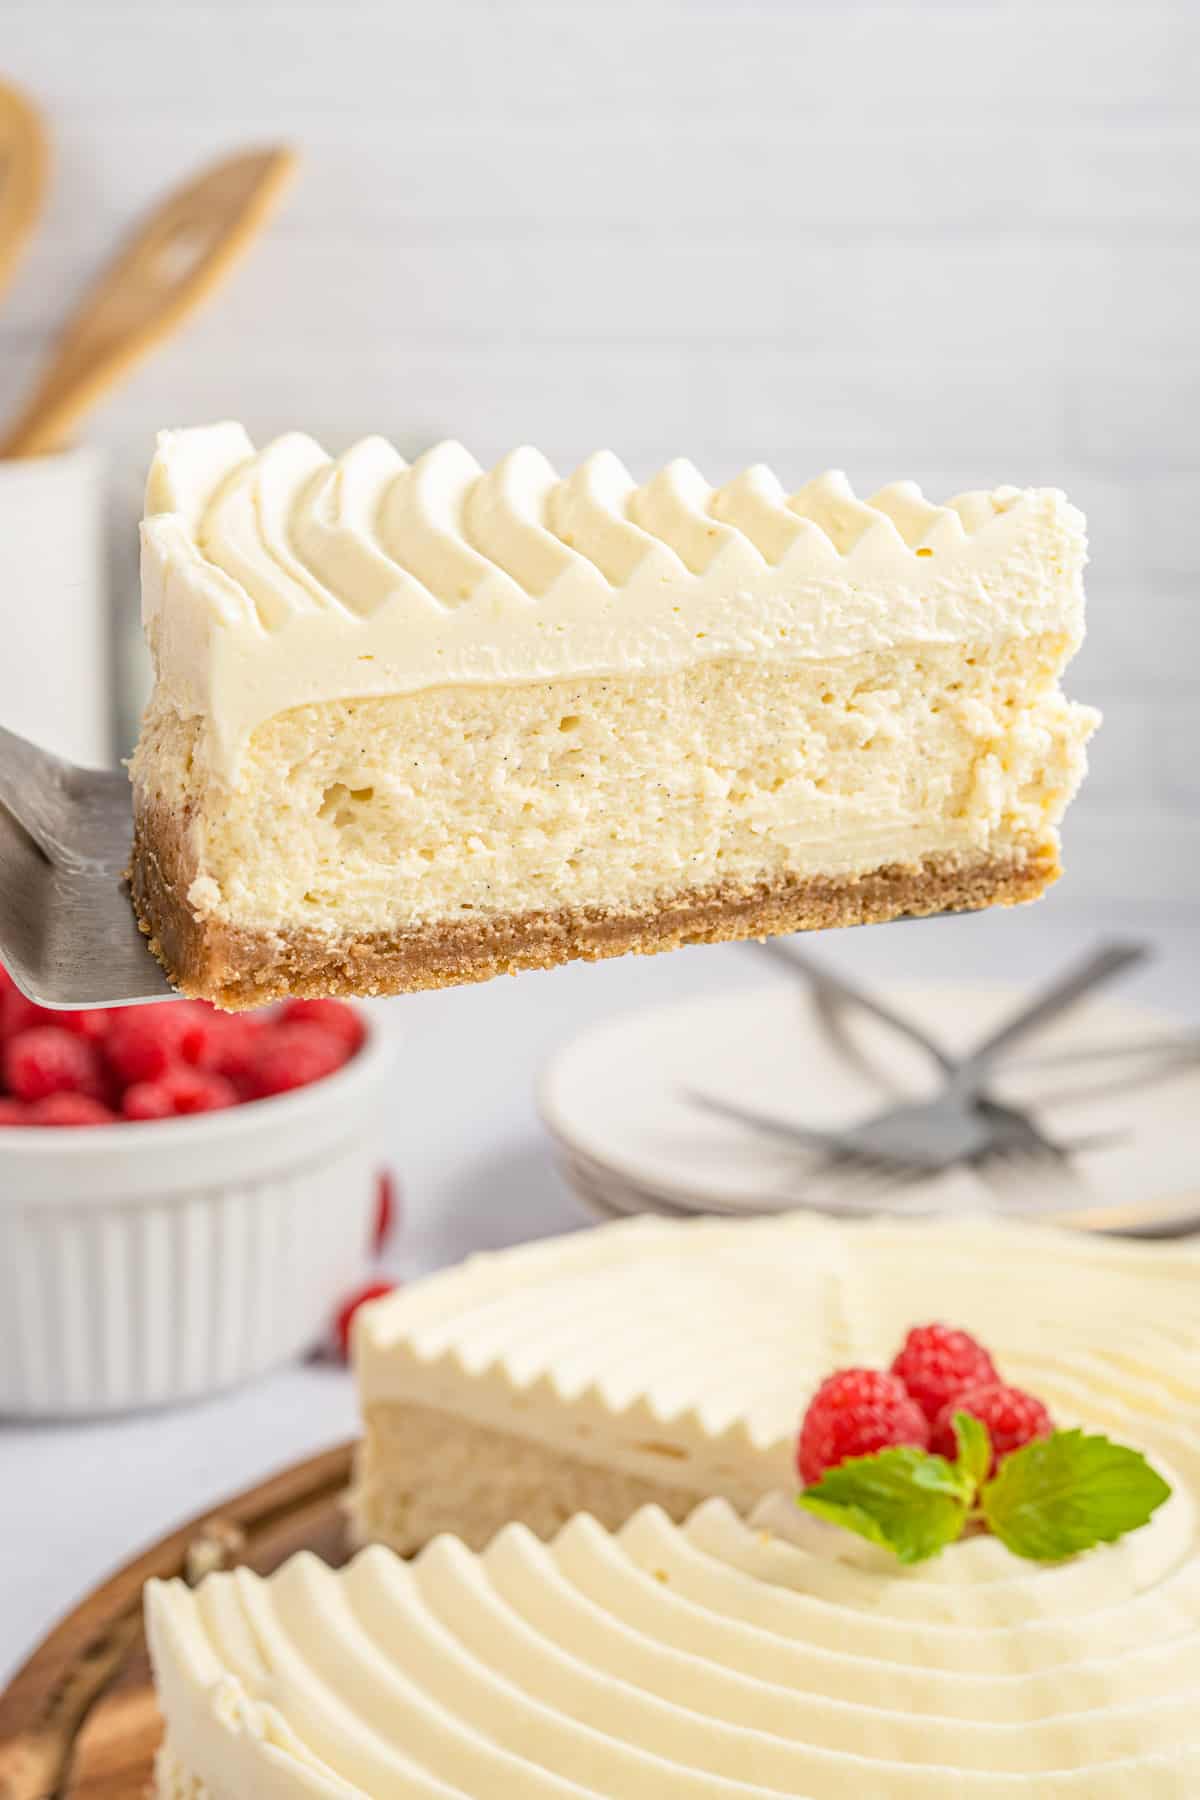 Cake server holding up a slice of the Vanilla Bean Cheesecake showing the layers.